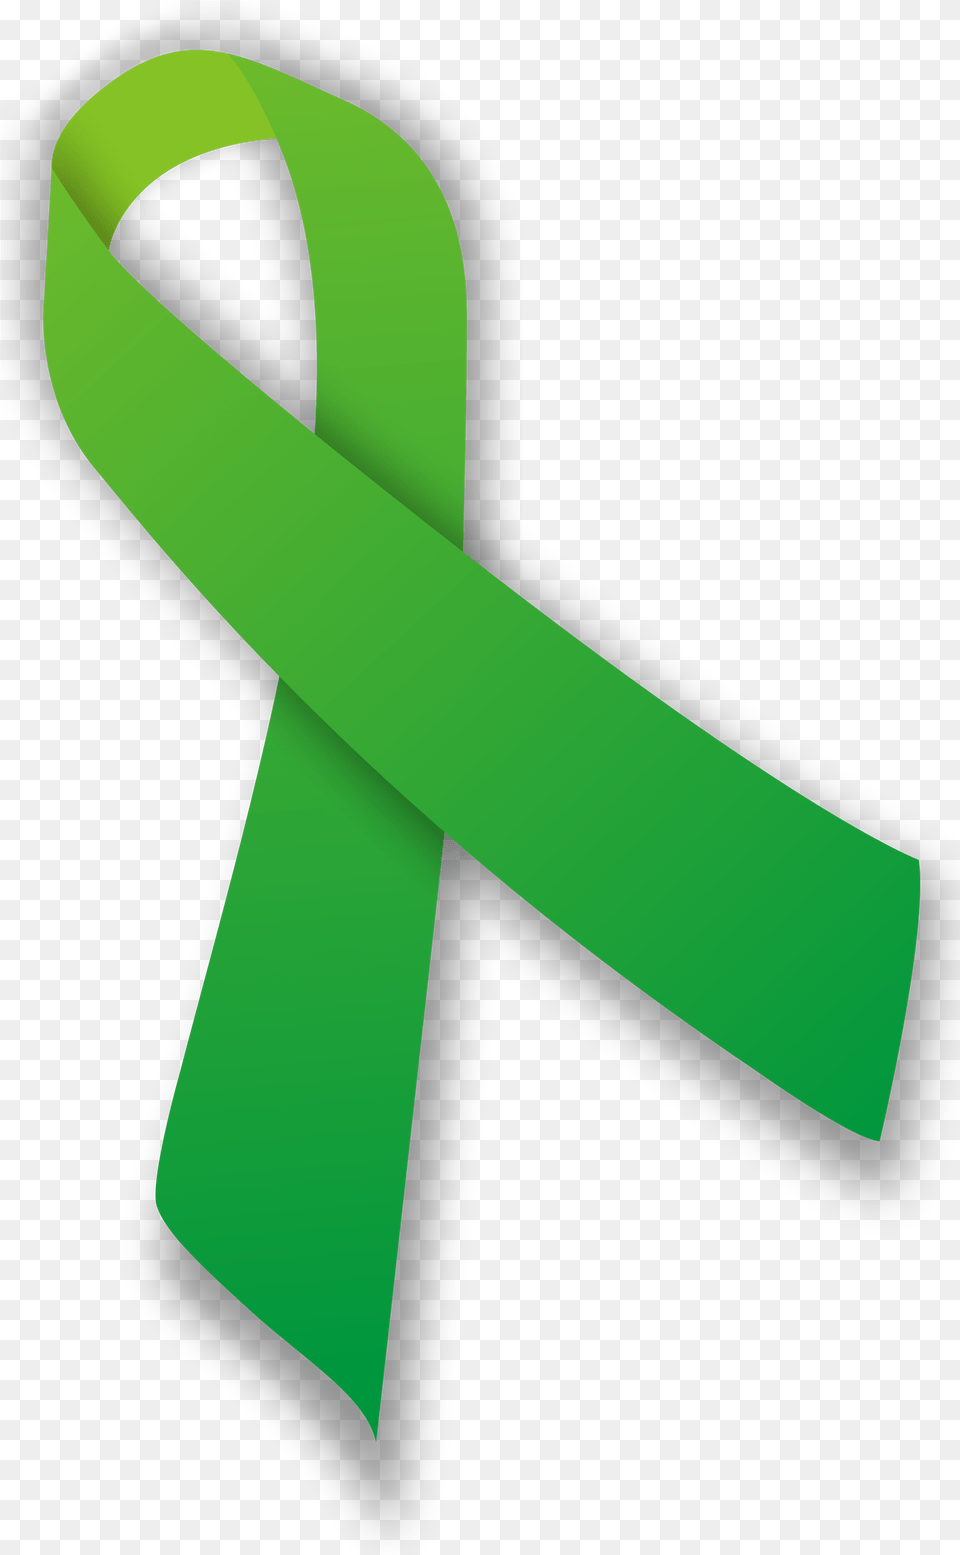 Green Ribbon 3 Image Anxiety And Depression Ribbon, Accessories, Formal Wear, Tie Free Png